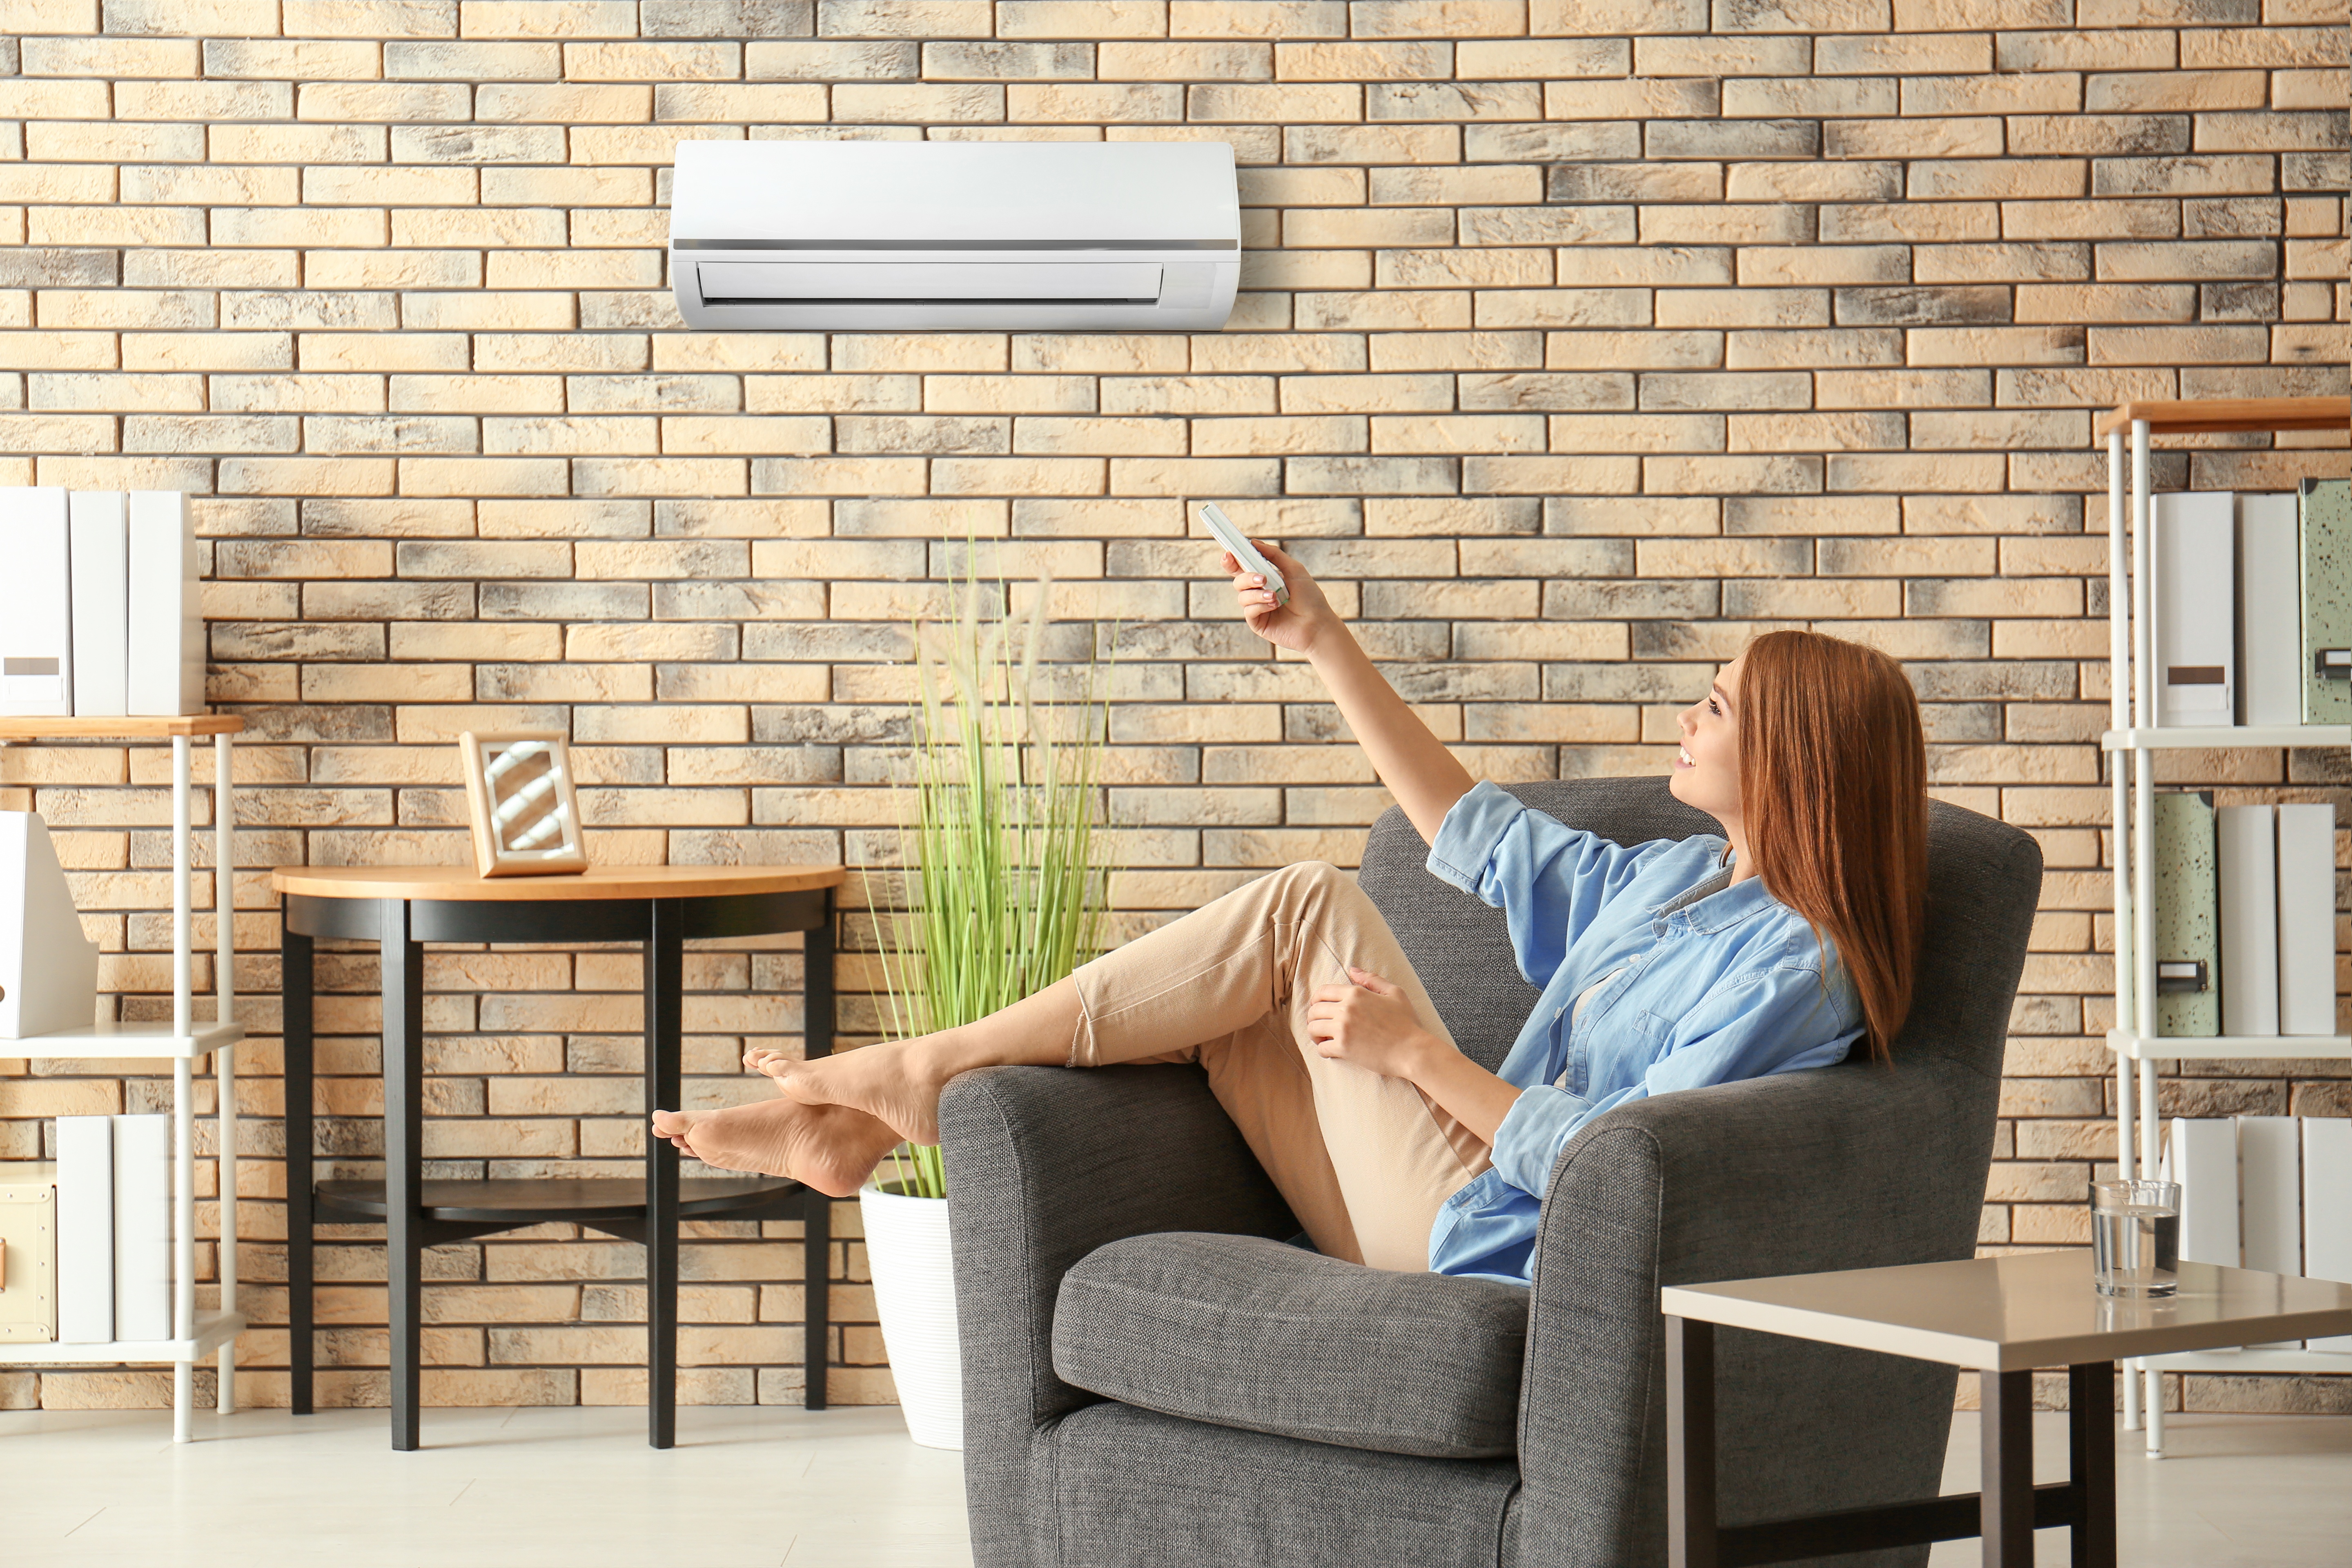 Air-Conditioning Options for Hydronic Heating Systems